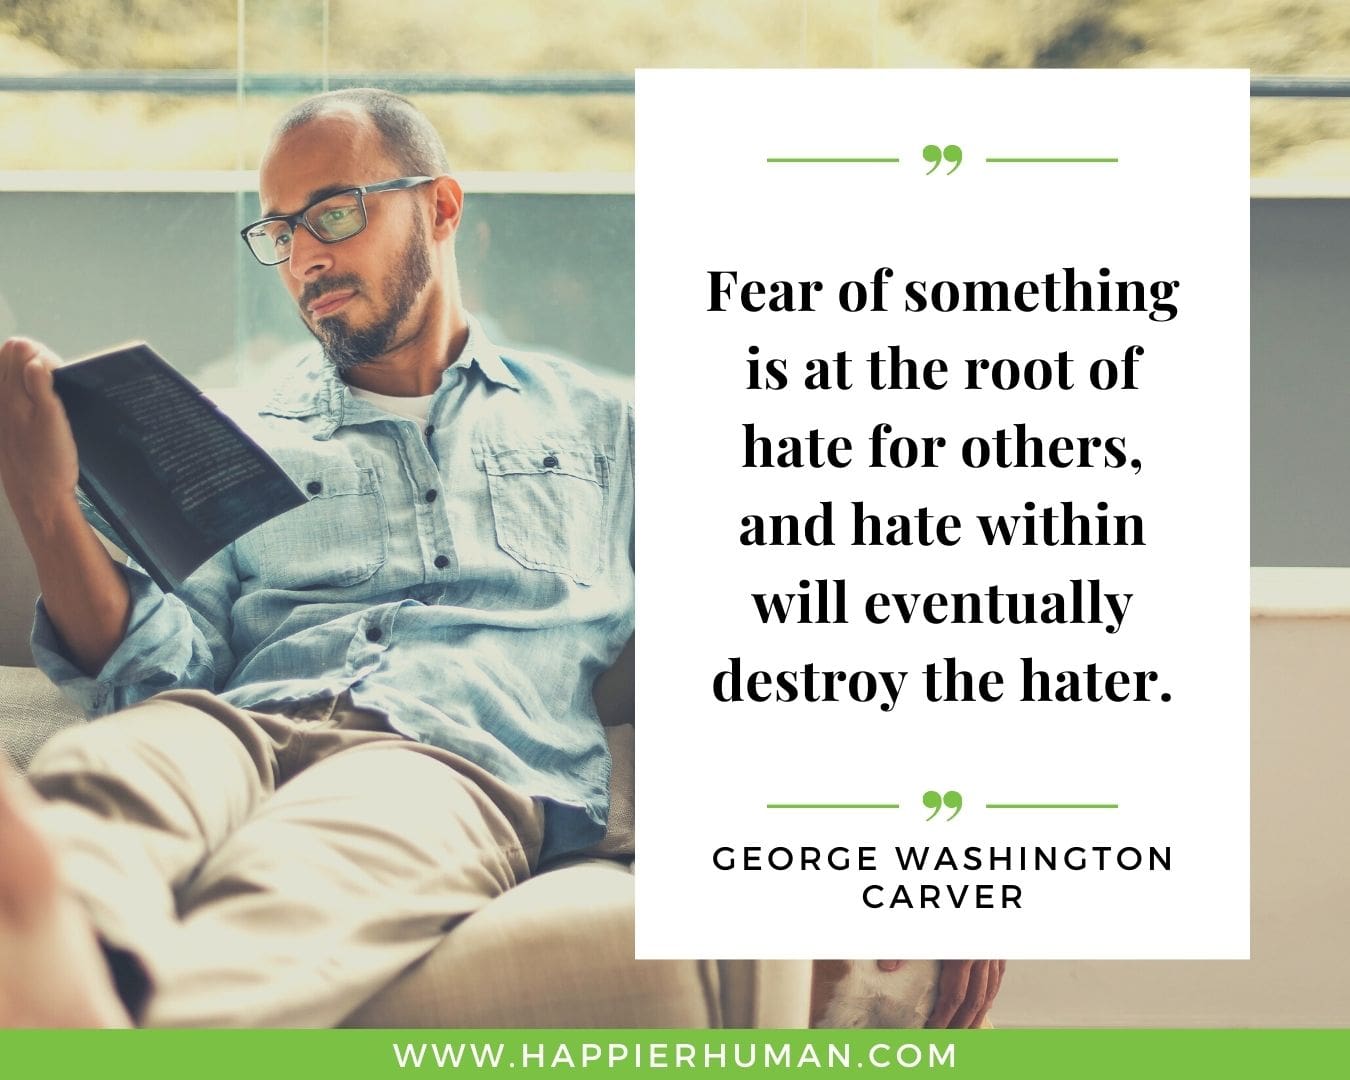 Haters Quotes - “Fear of something is at the root of hate for others, and hate within will eventually destroy the hater.” - George Washington Carver